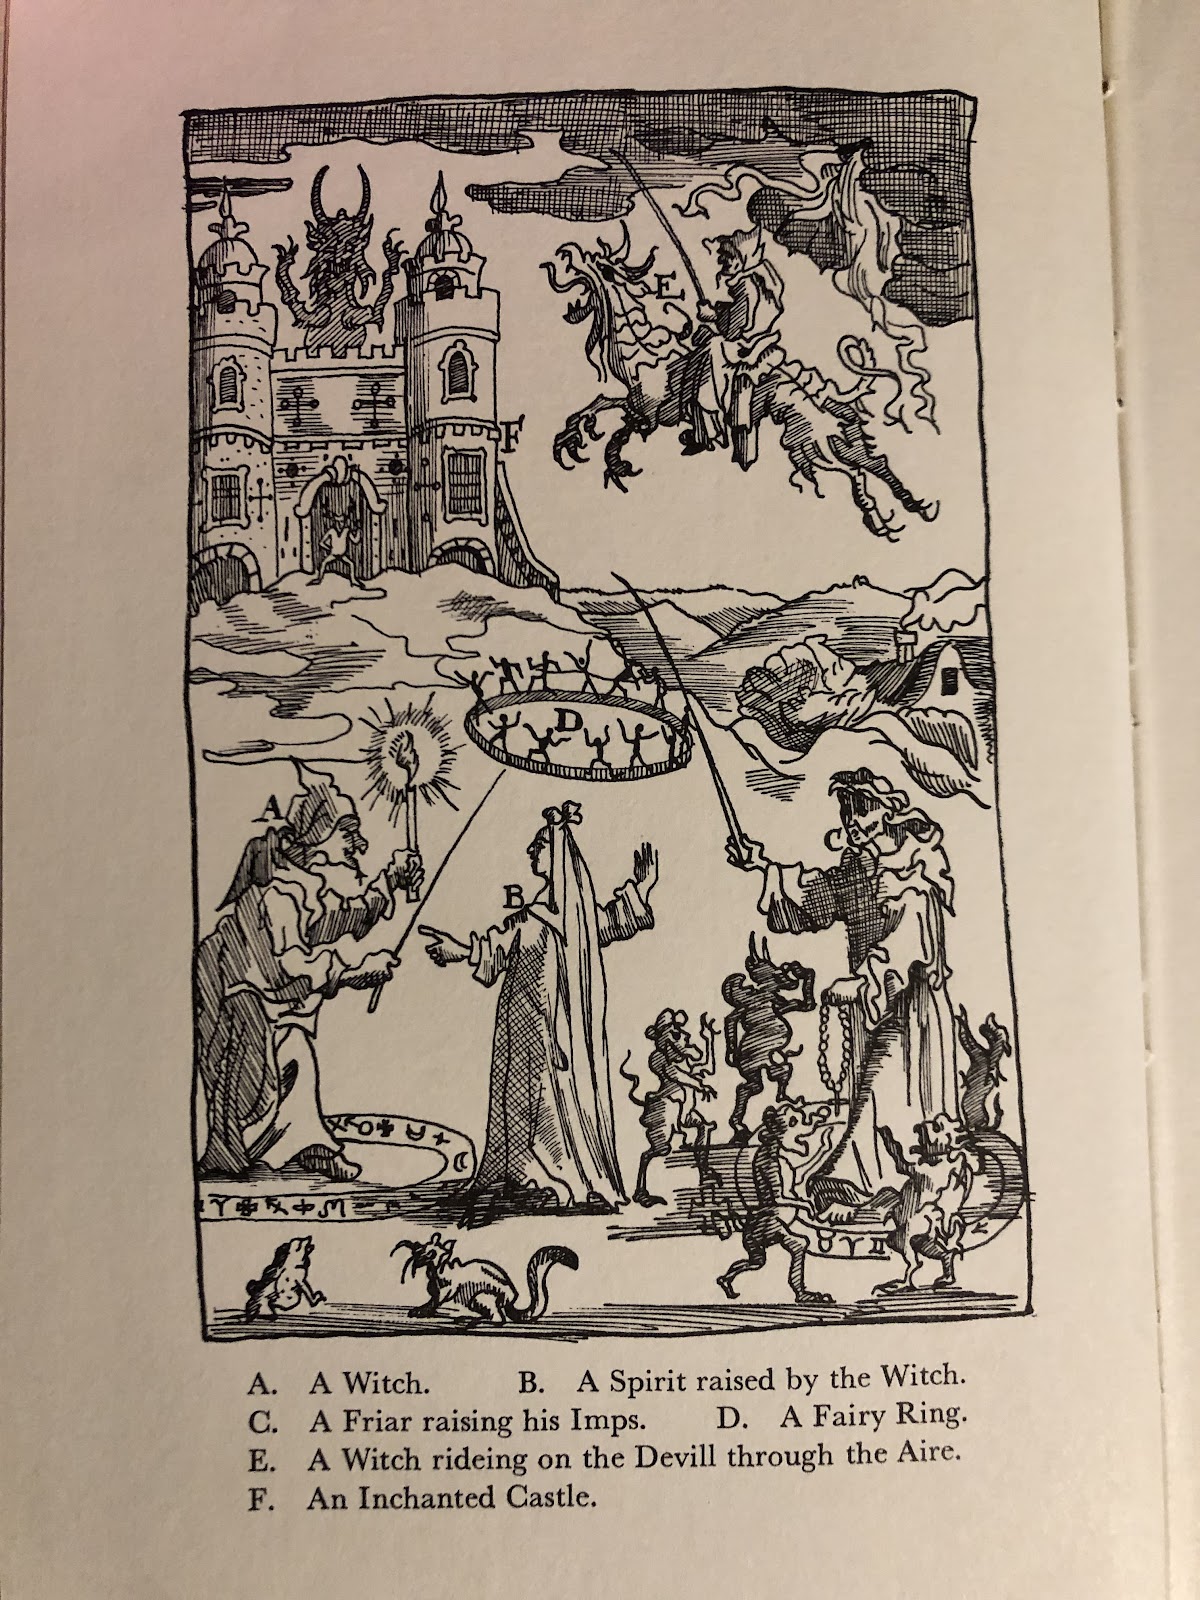 The frontispiece image of the book The Personnel of Fairyland showing a witch, a friar, a fairy ring, the devil, and an enchanted castle. 